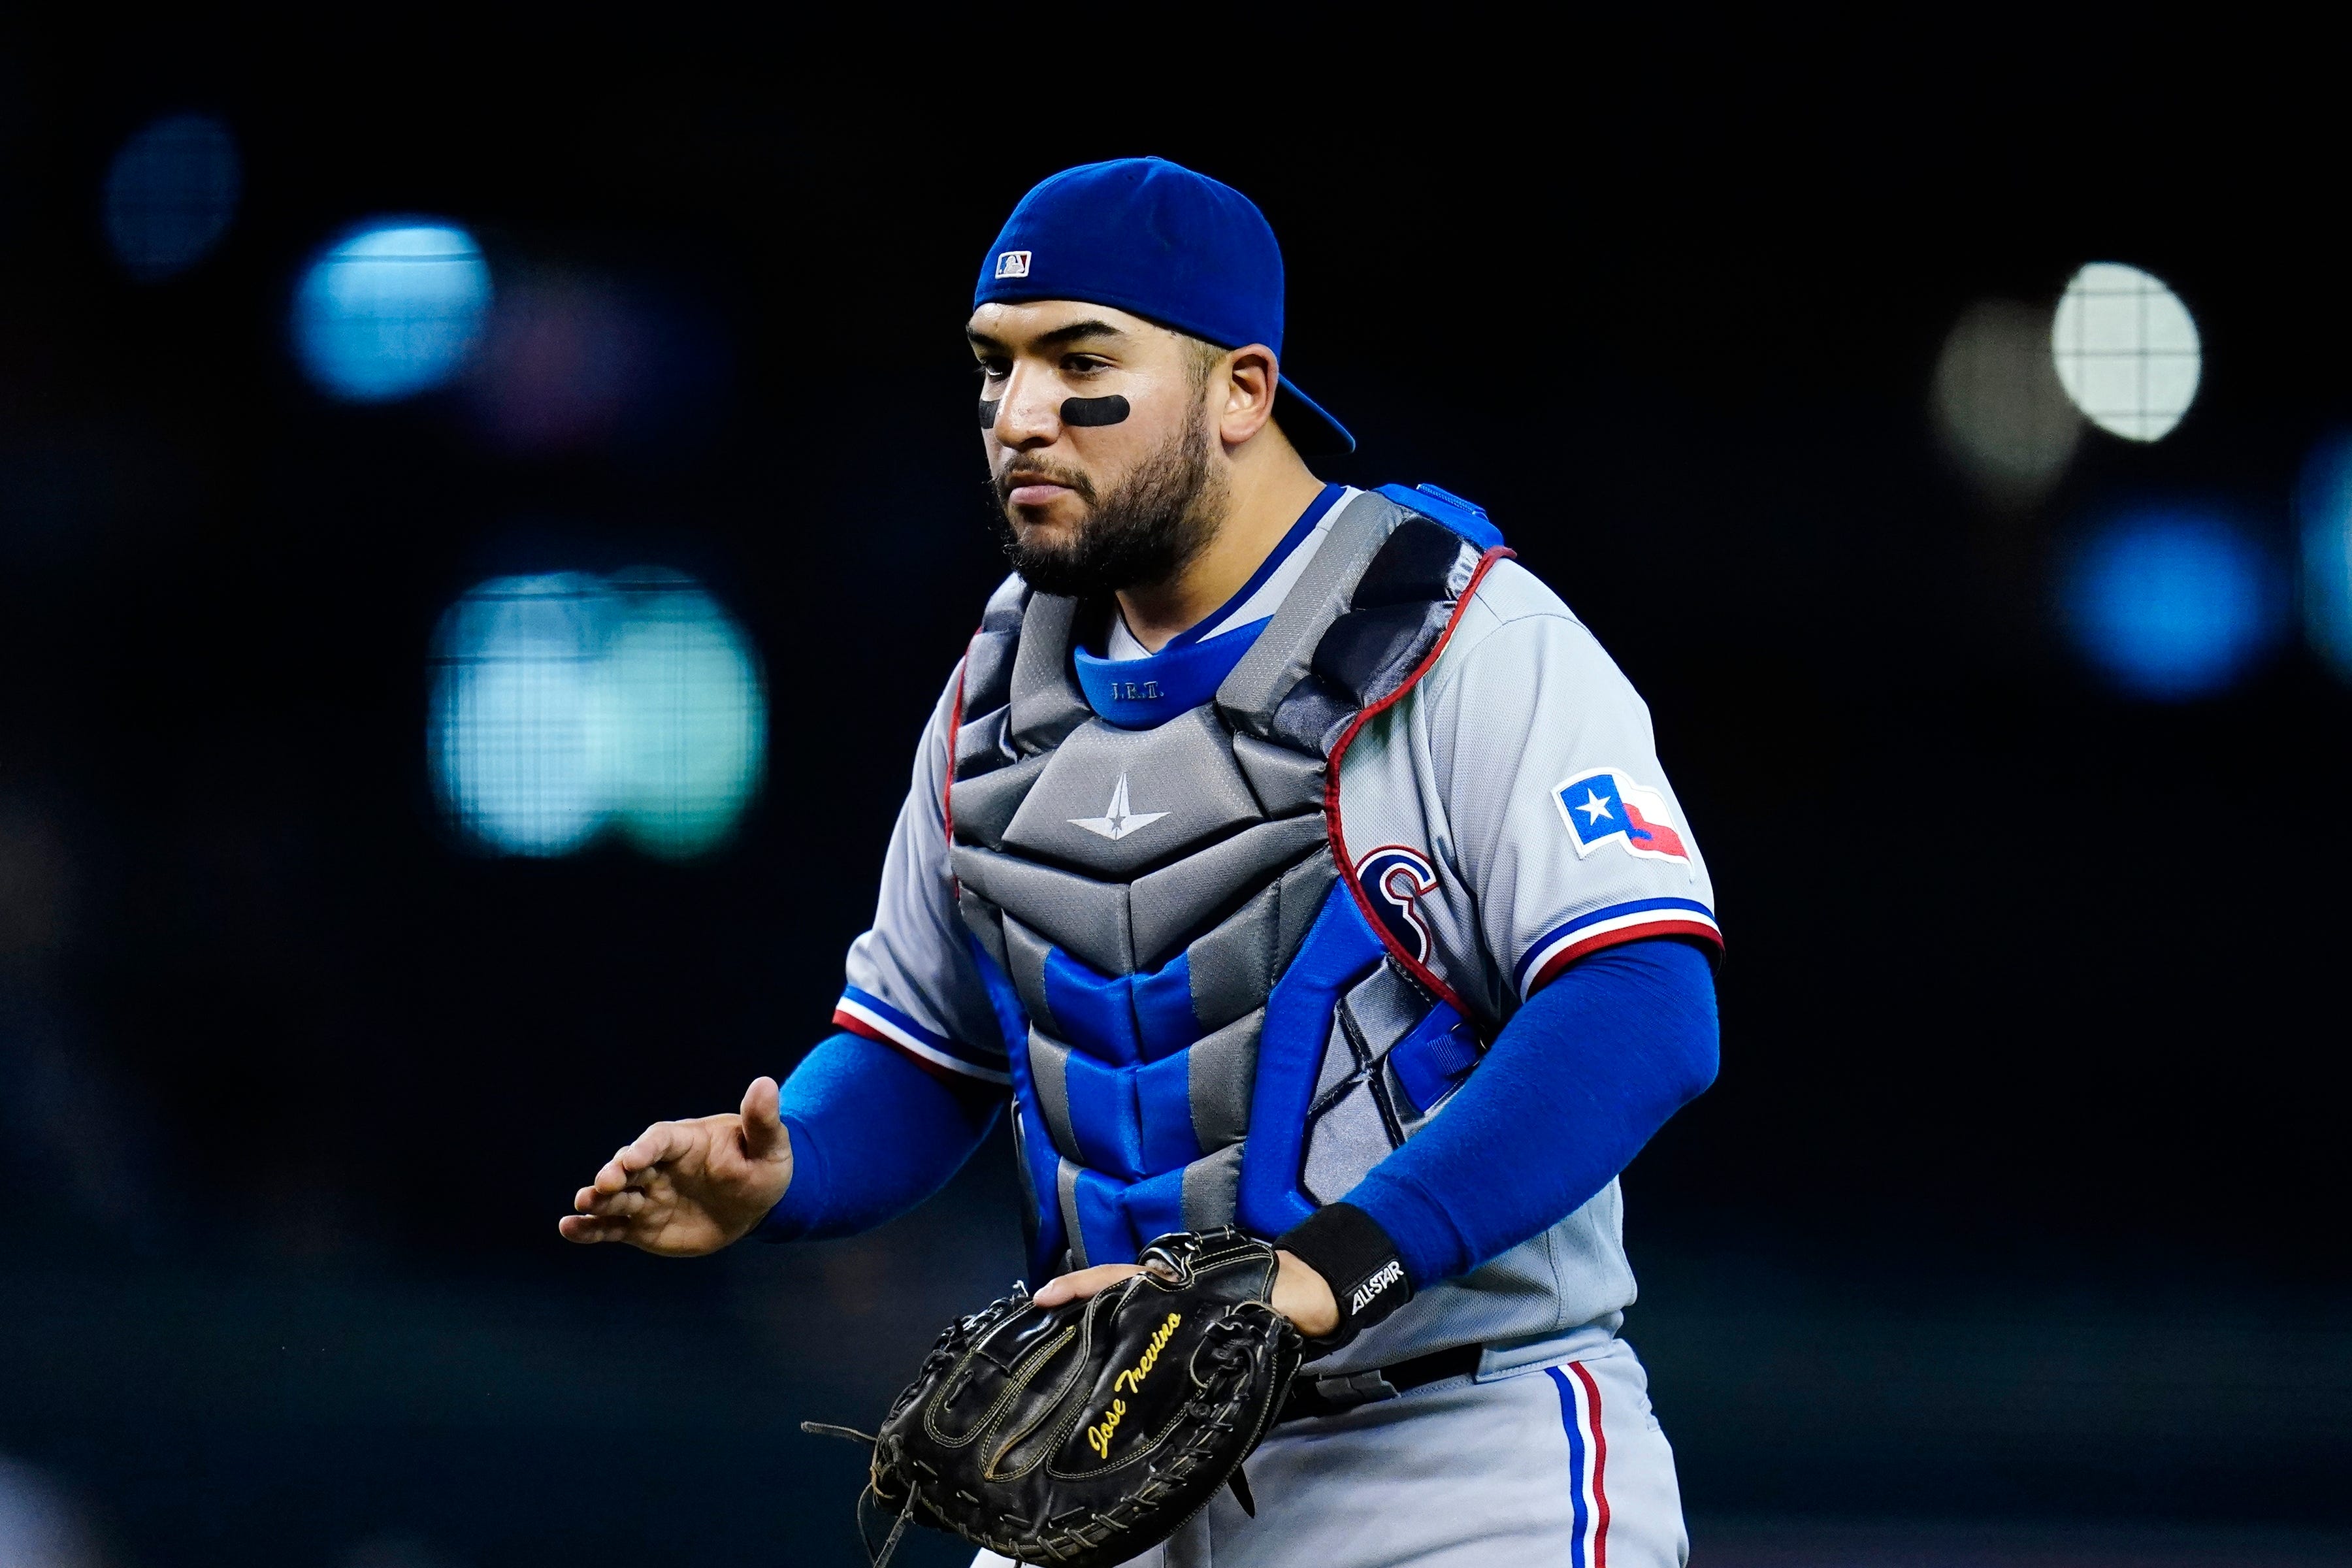 Texas Rangers: Call Up of Jose Trevino Should Be His Last